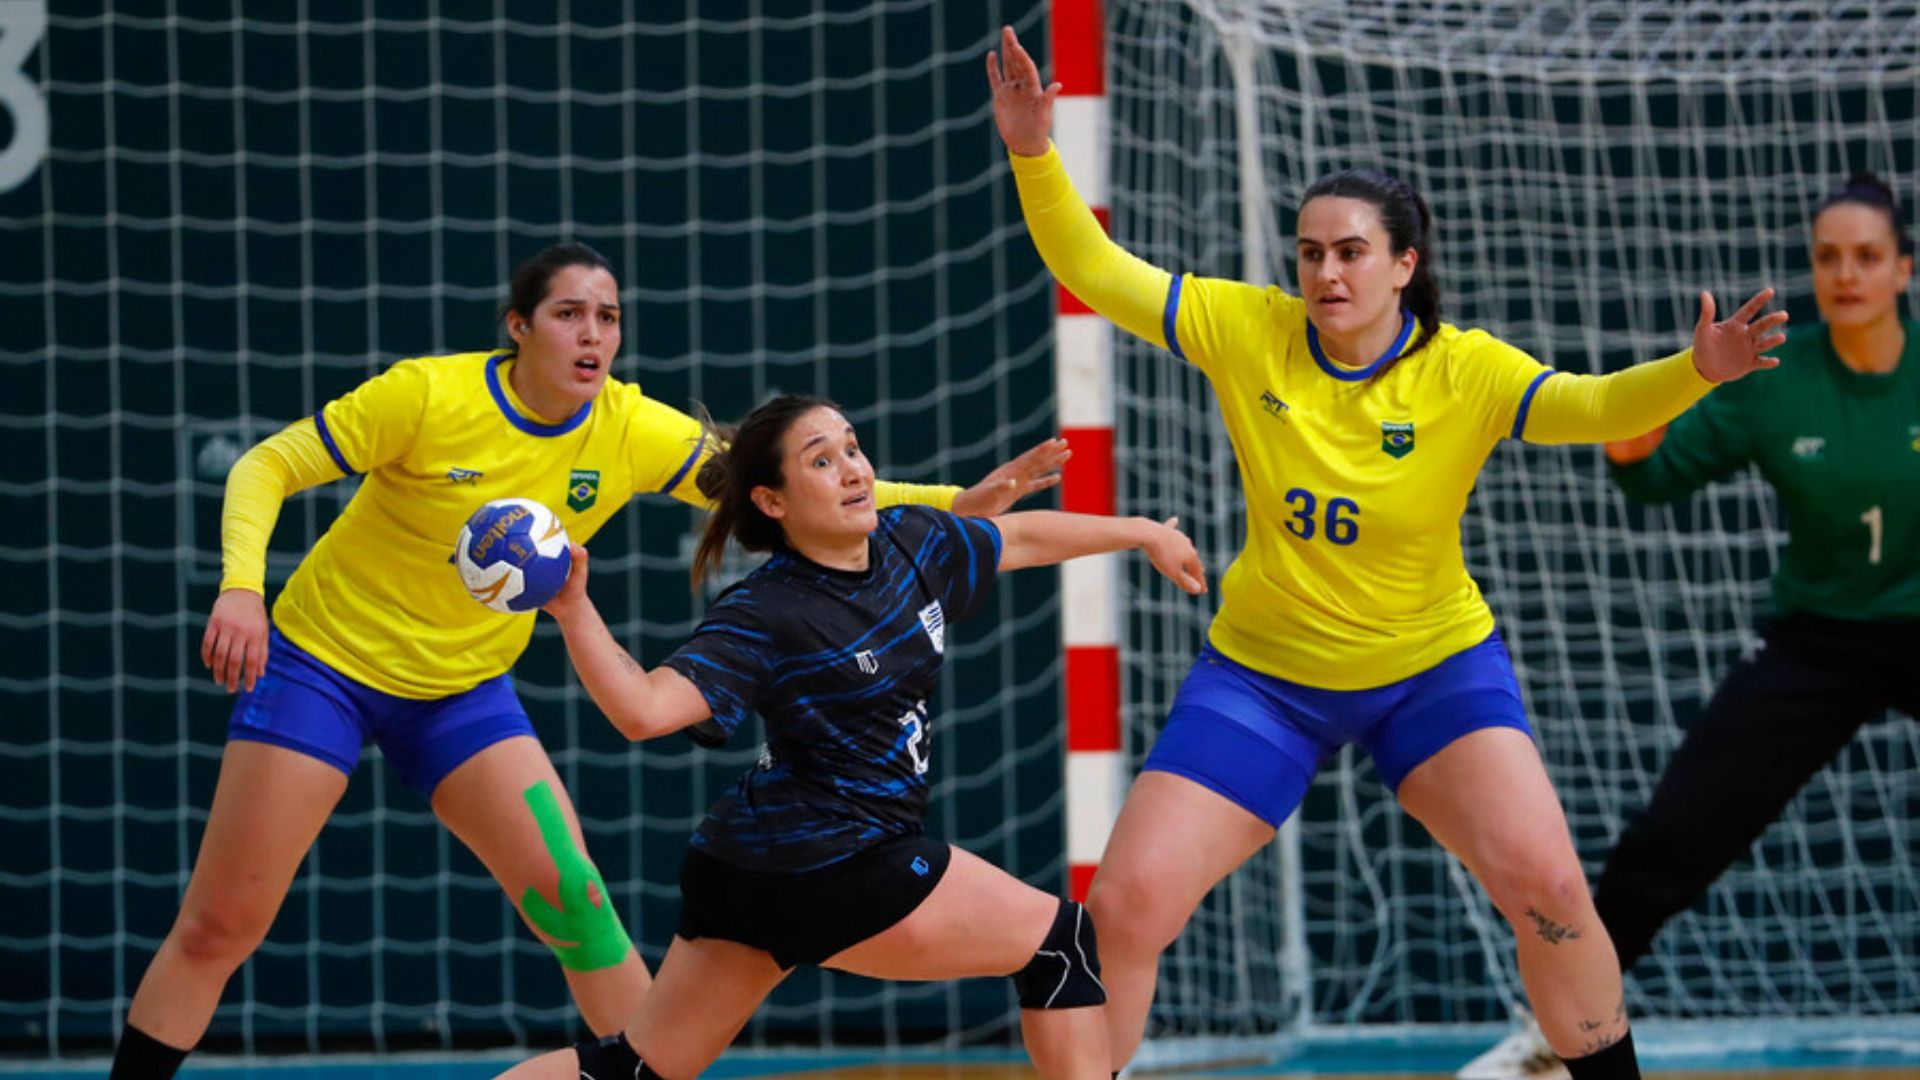 Handball: Brazil defeats Uruguay with a big win, securing their second victory